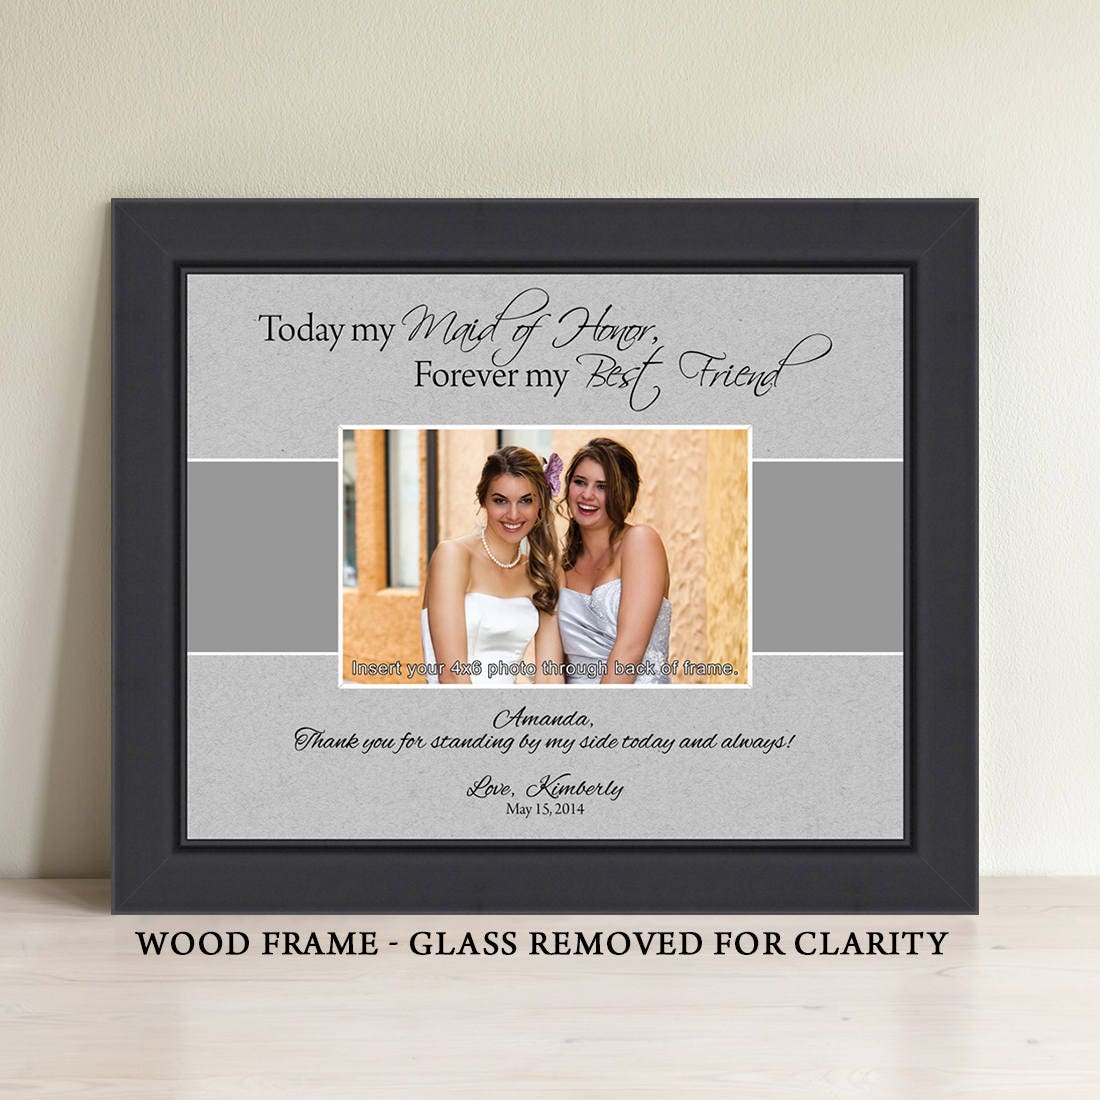 Details about   Personalized Maid of Honor Picture Frame 